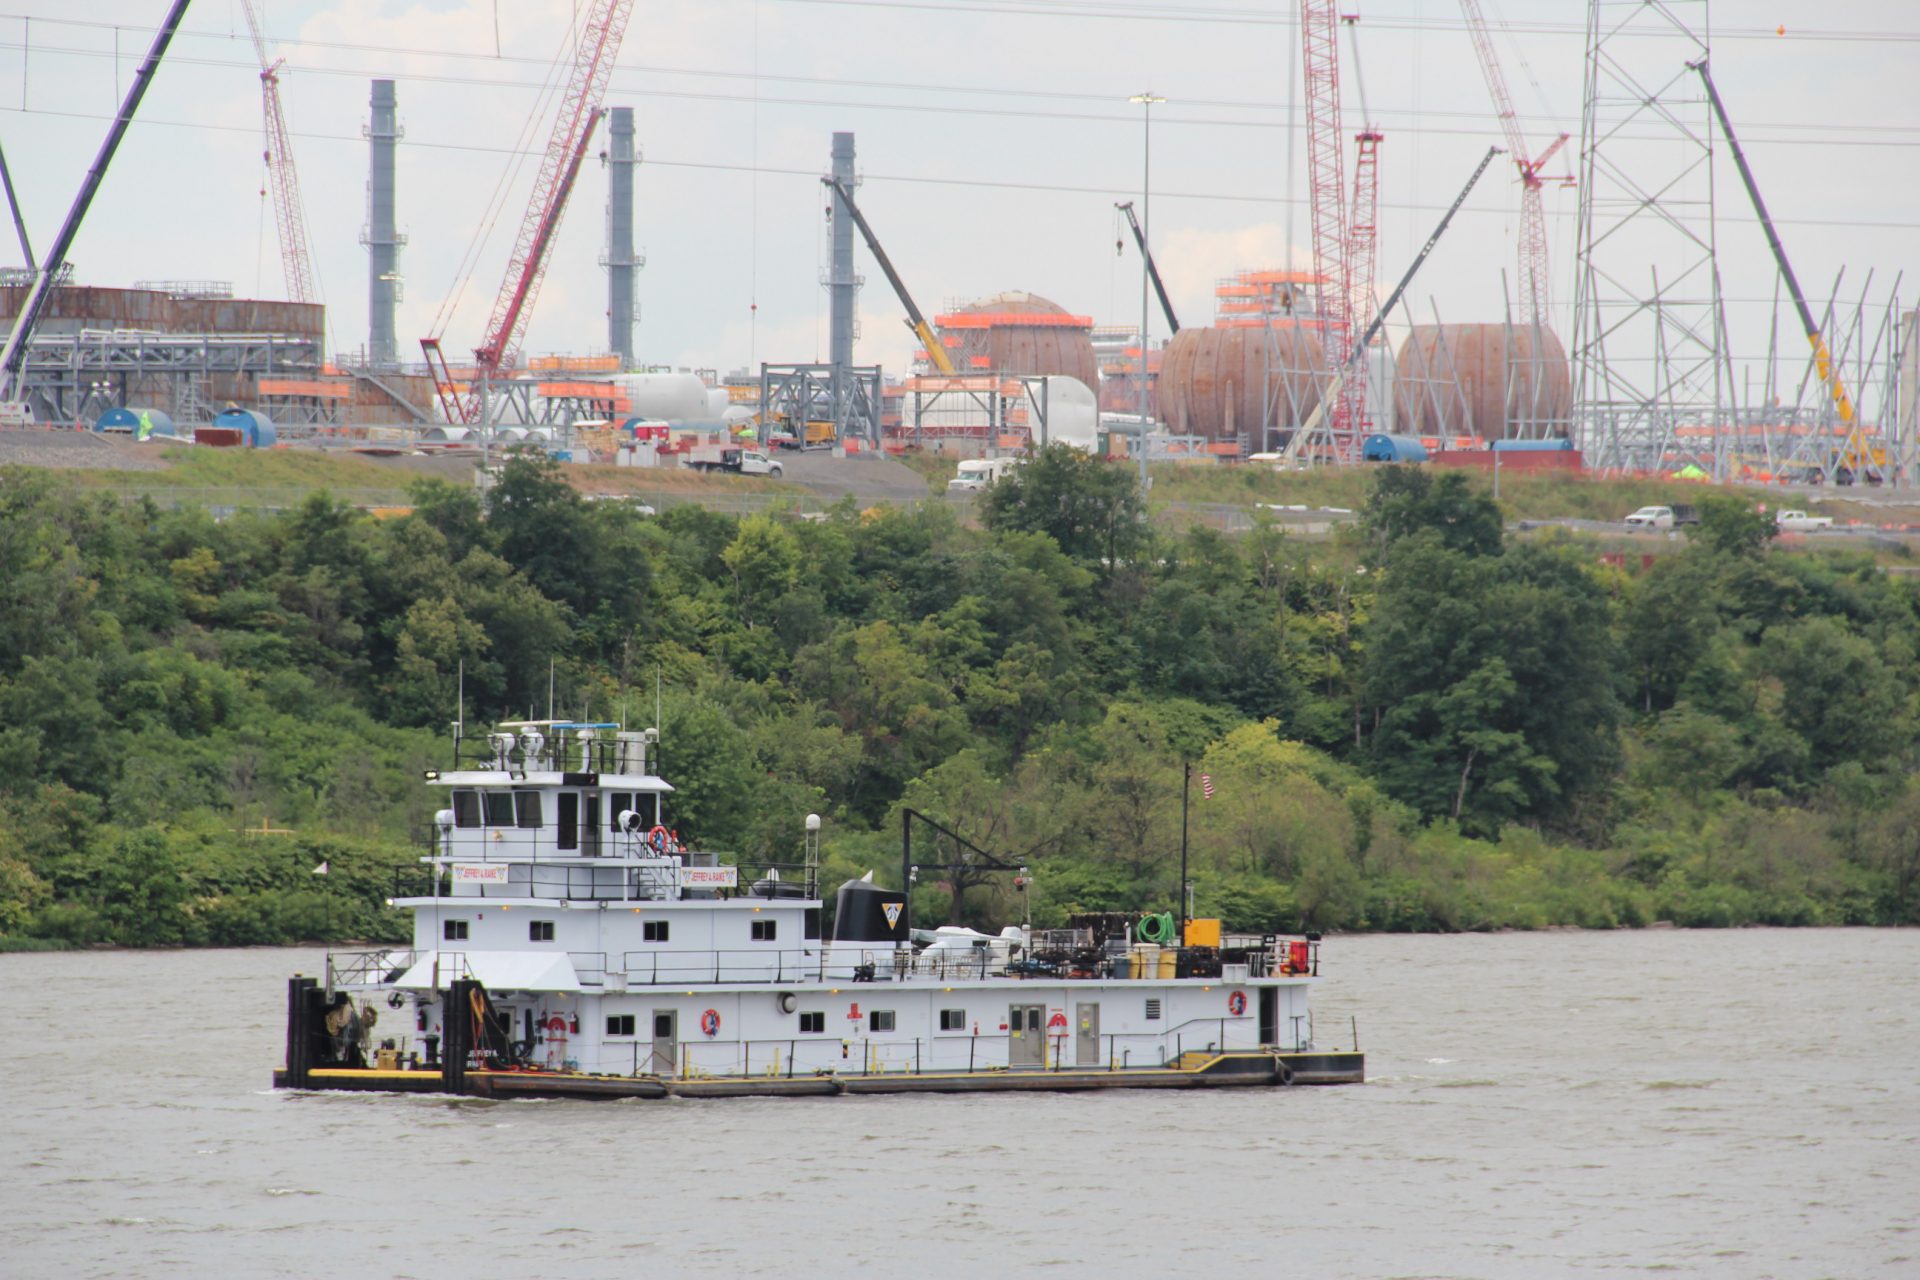 Shell's ethane cracker plant, under construction in June 2019, is seen from the Ohio River.